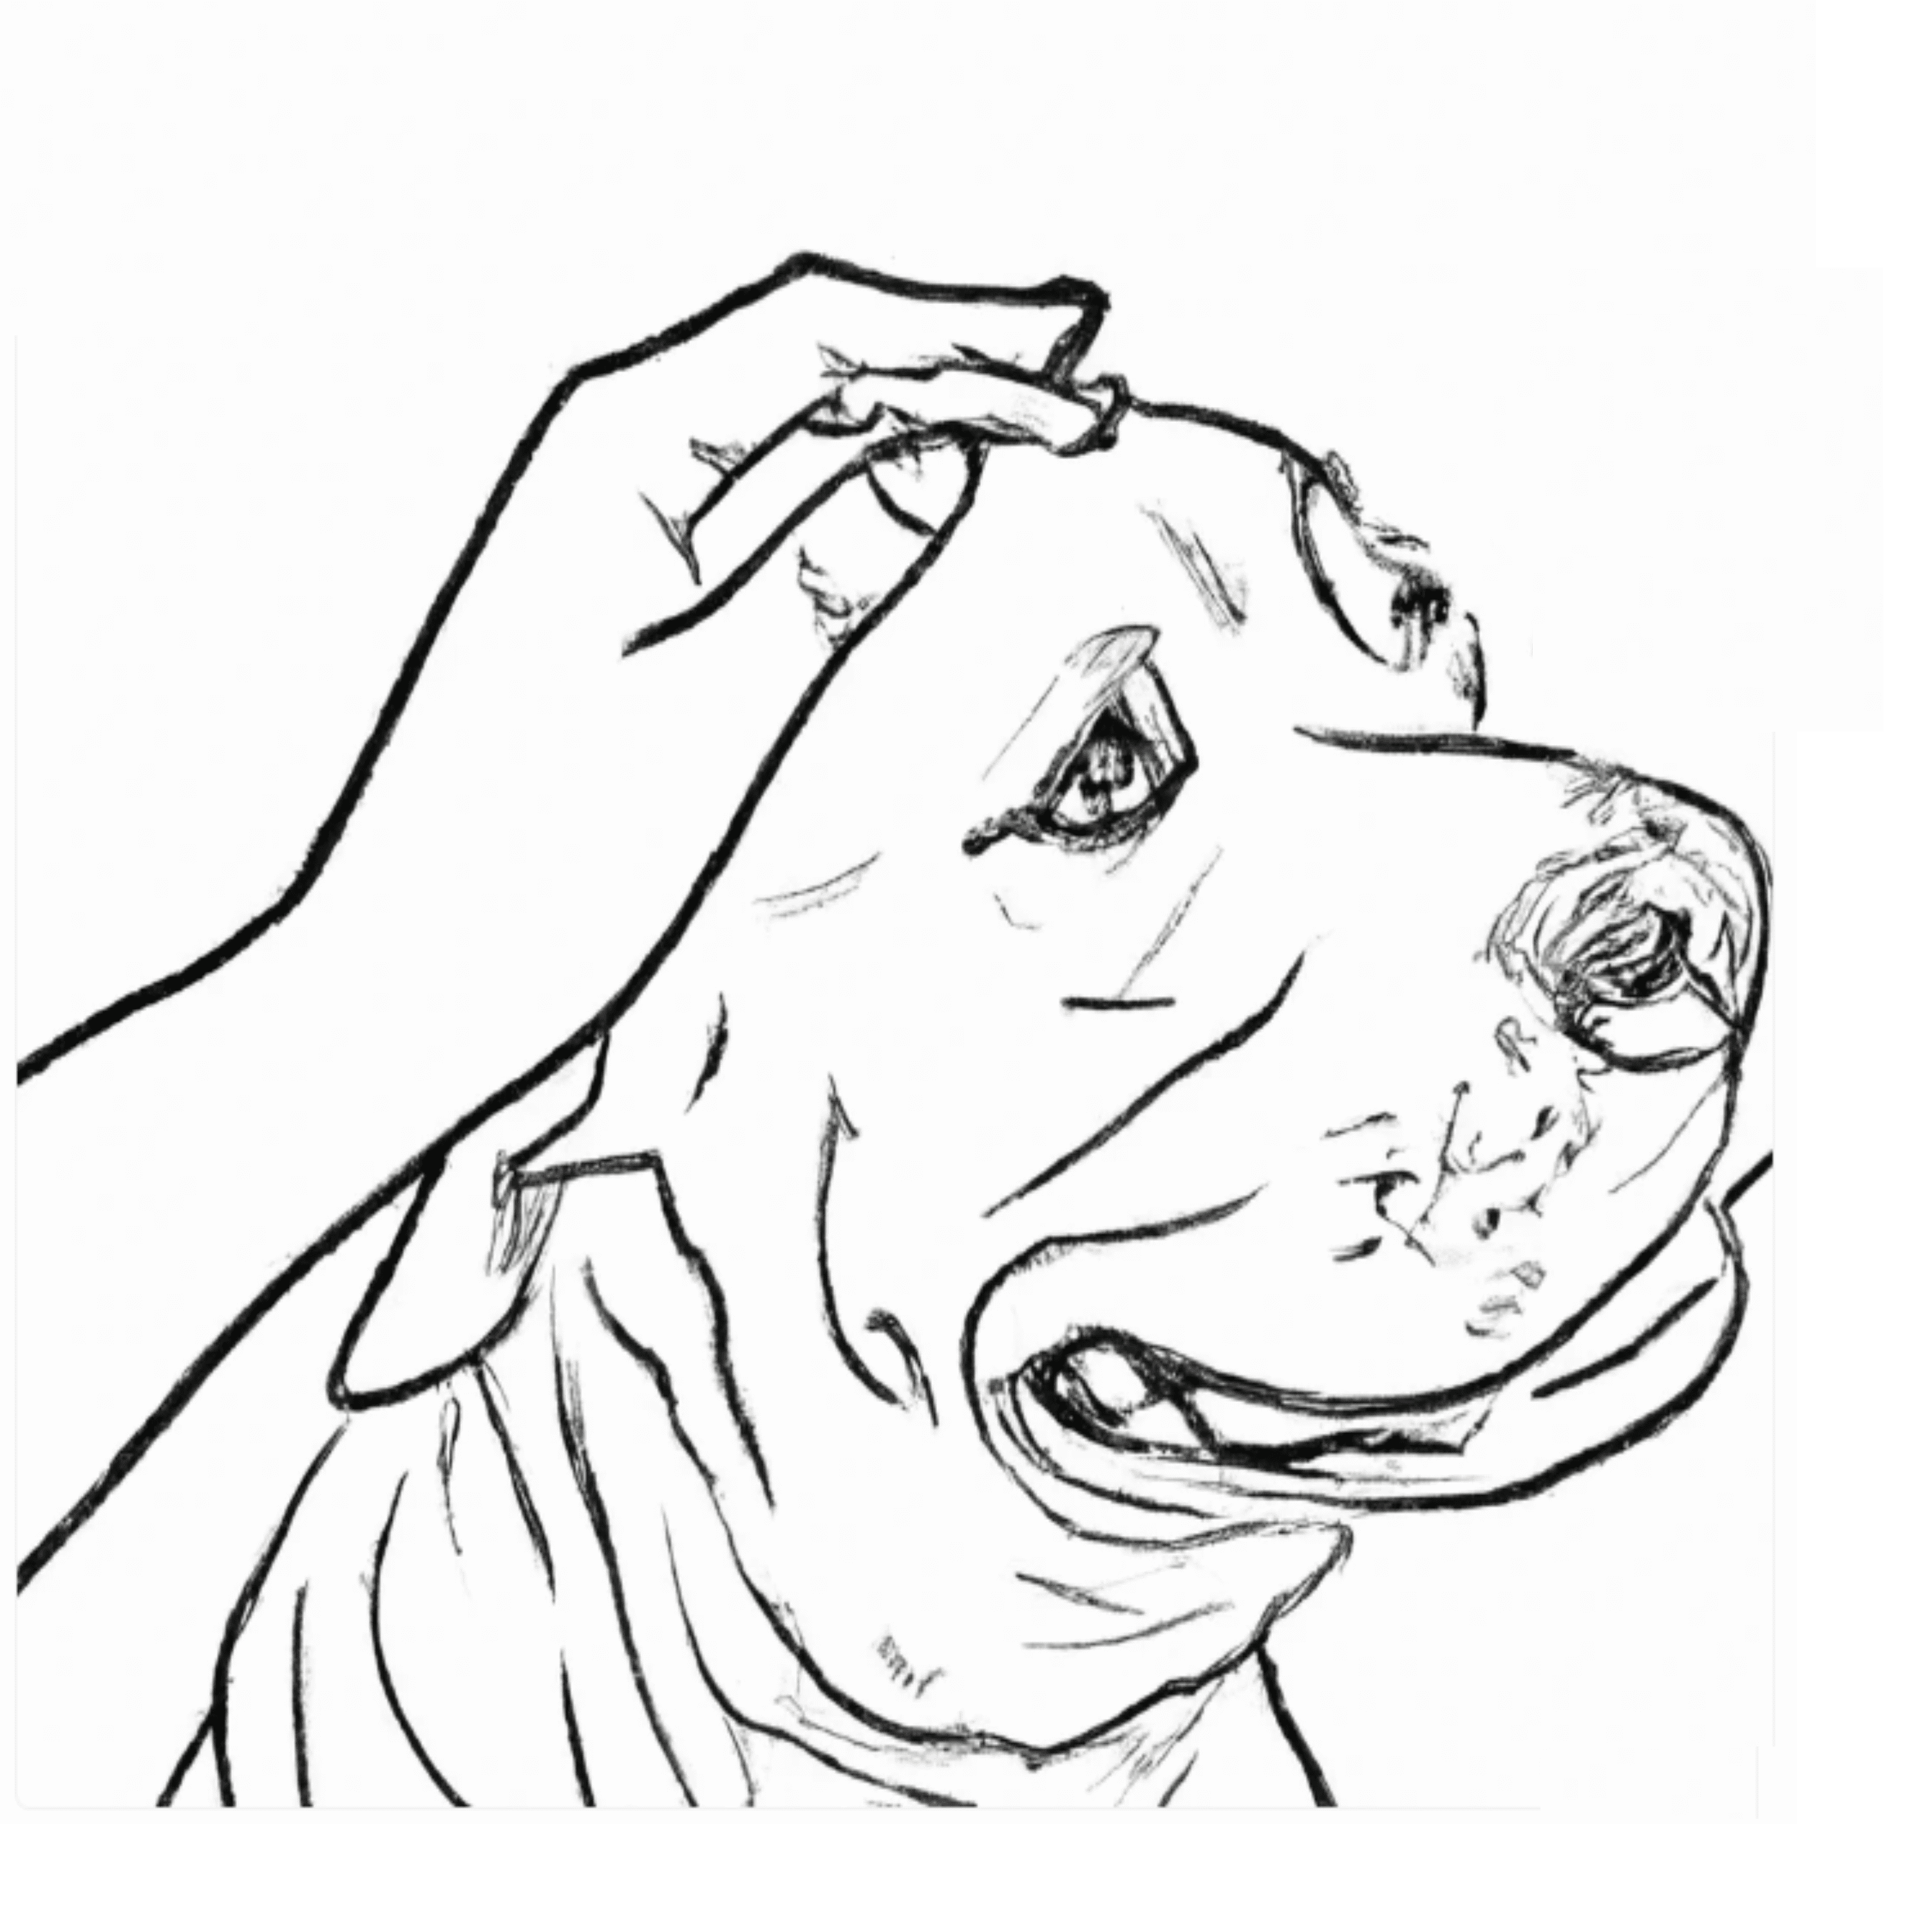 Line drawing of a hand patting a dog's head